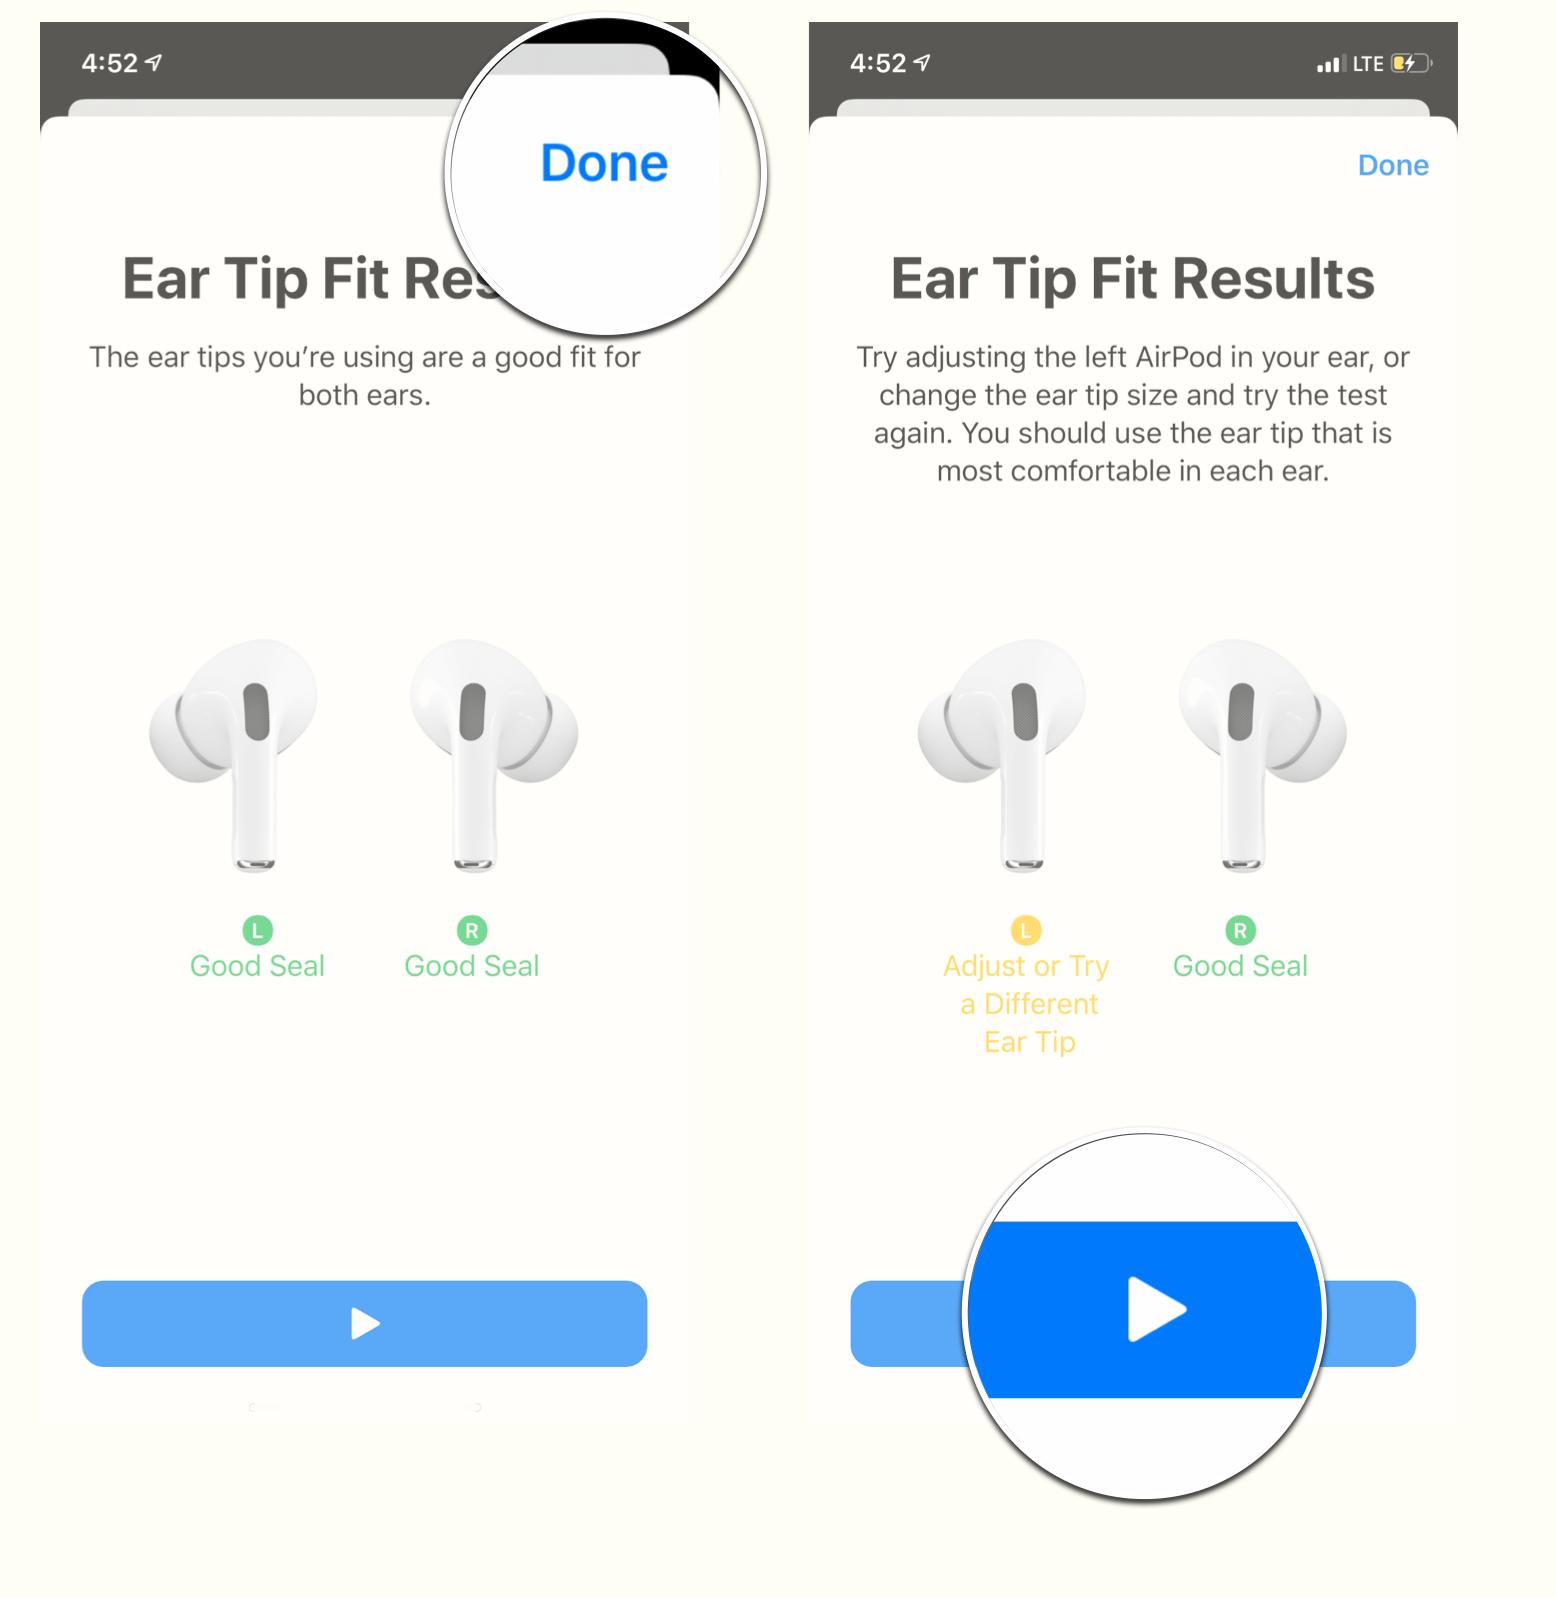 How To Cheat On A Test Using Airpods How to test the fit of your AirPods Pro ear tips | iMore